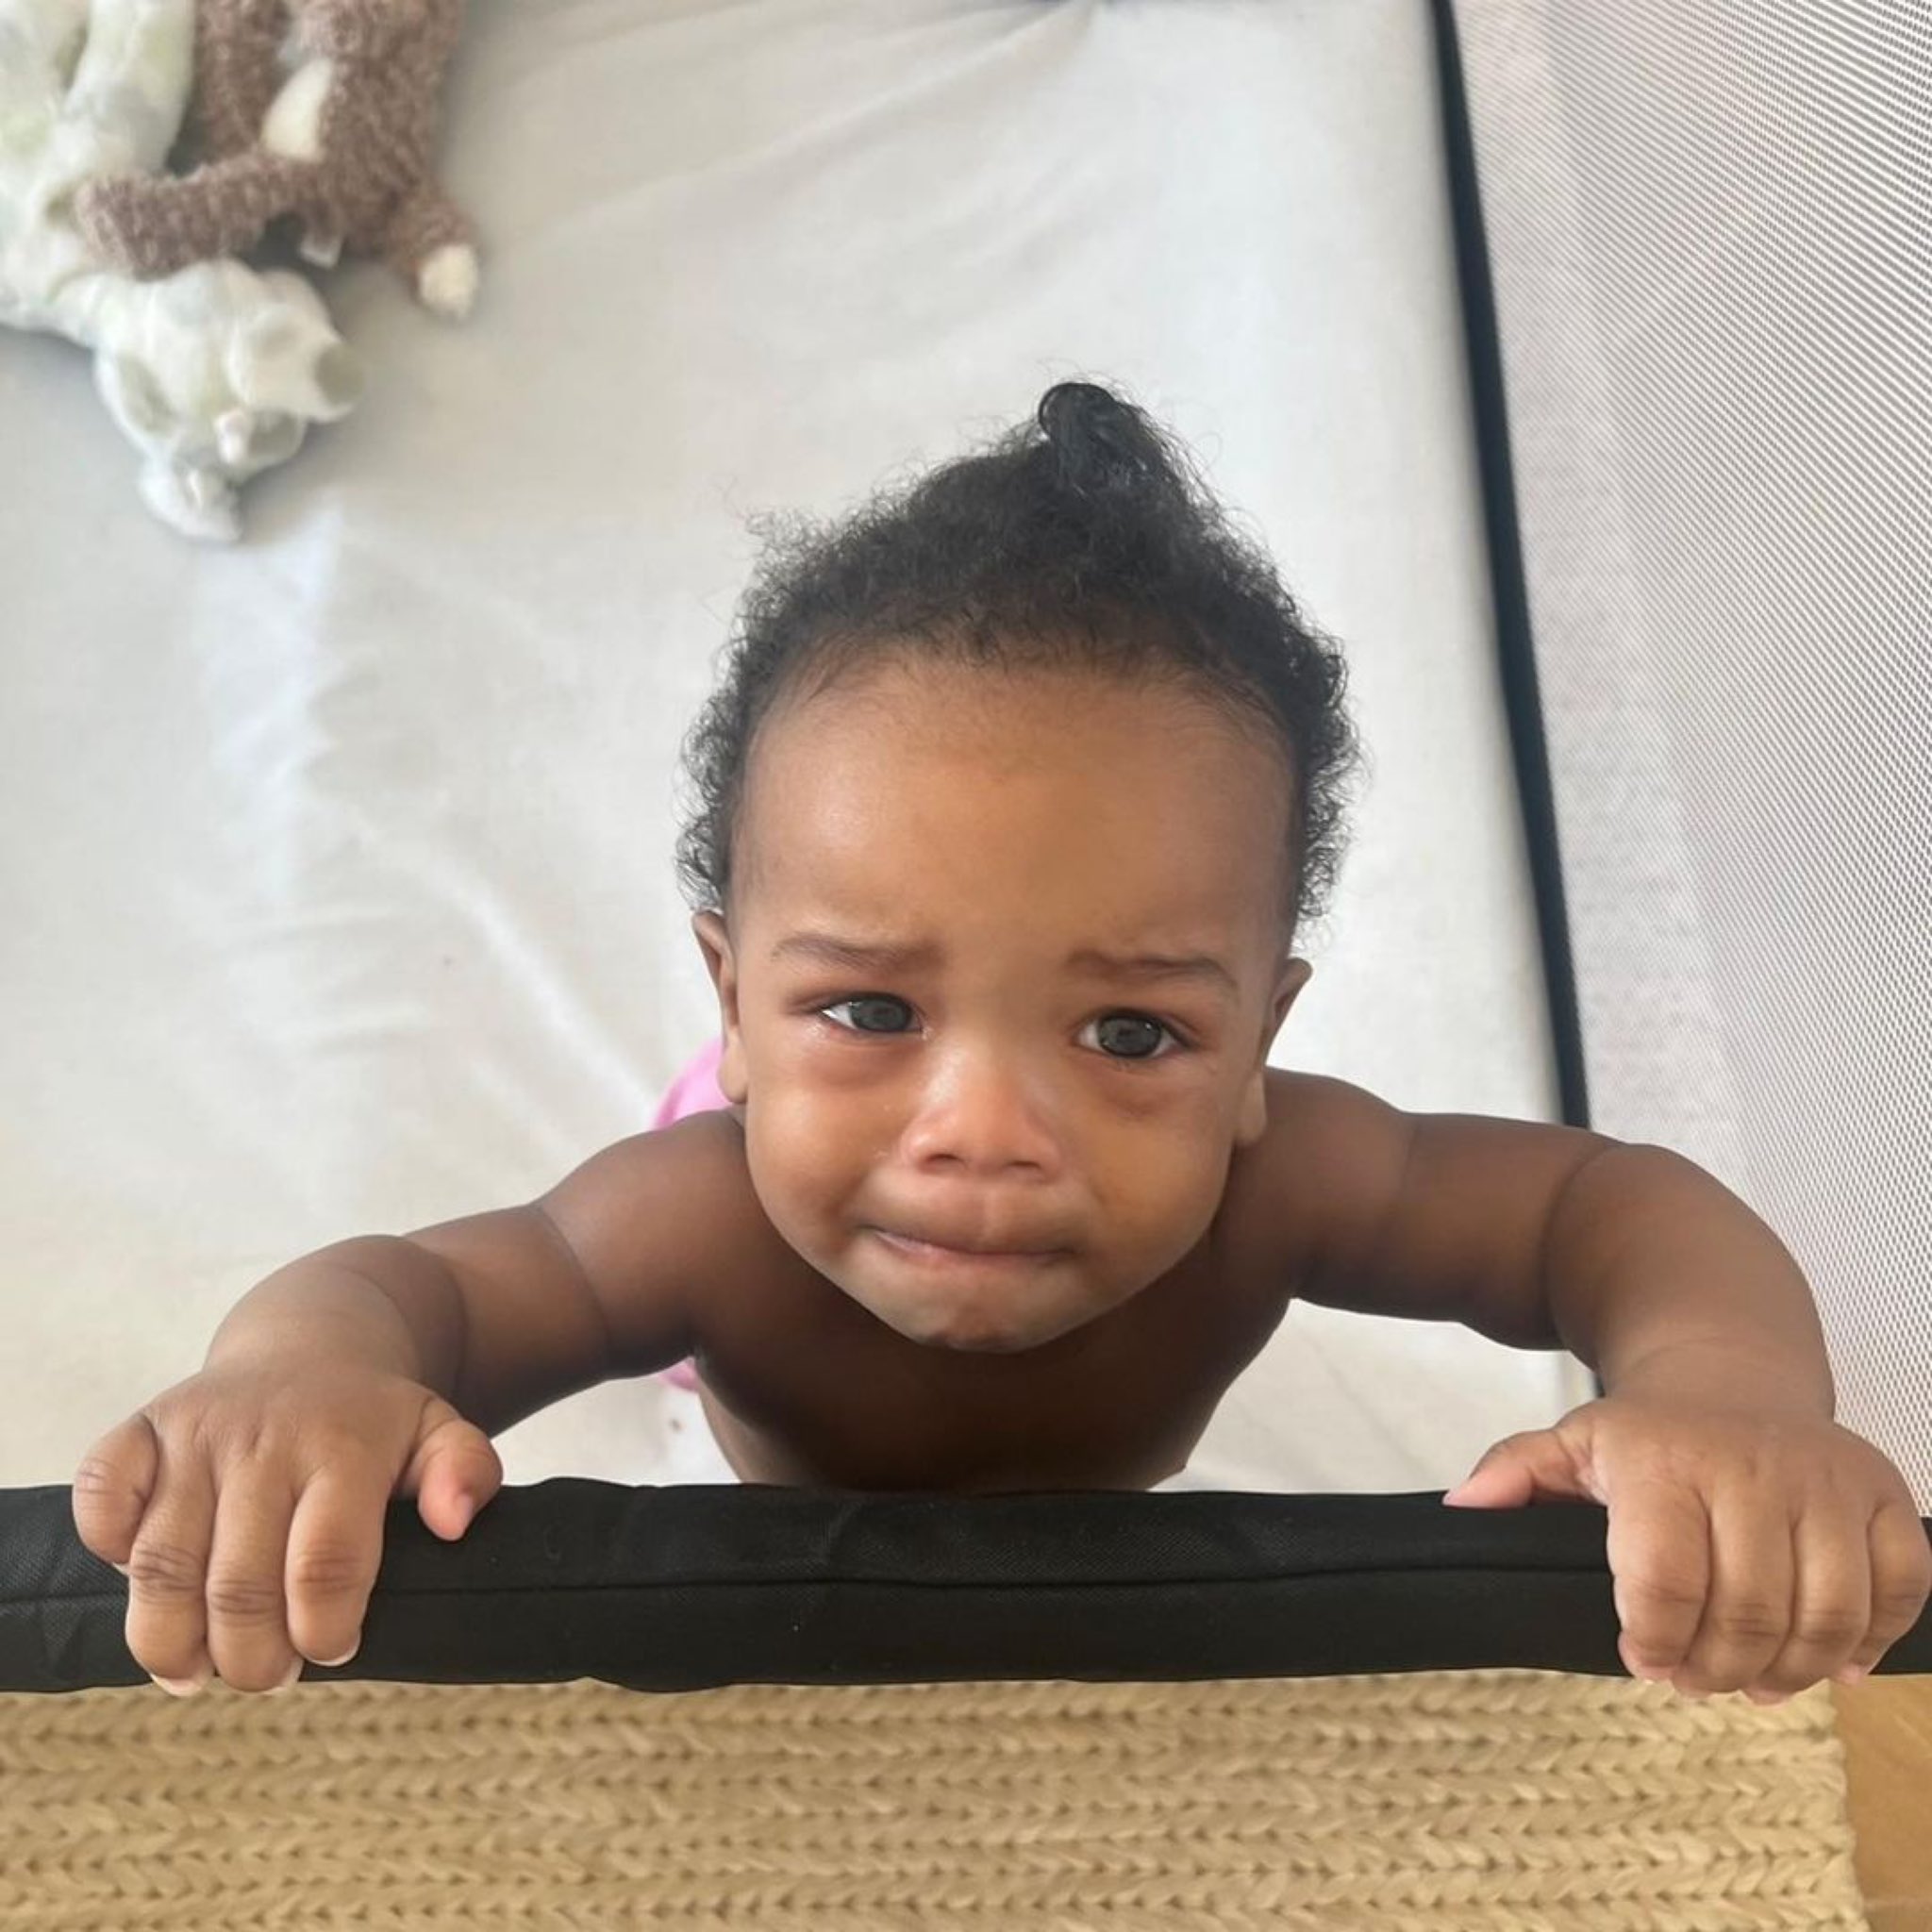 Rihanna's 9-month old son